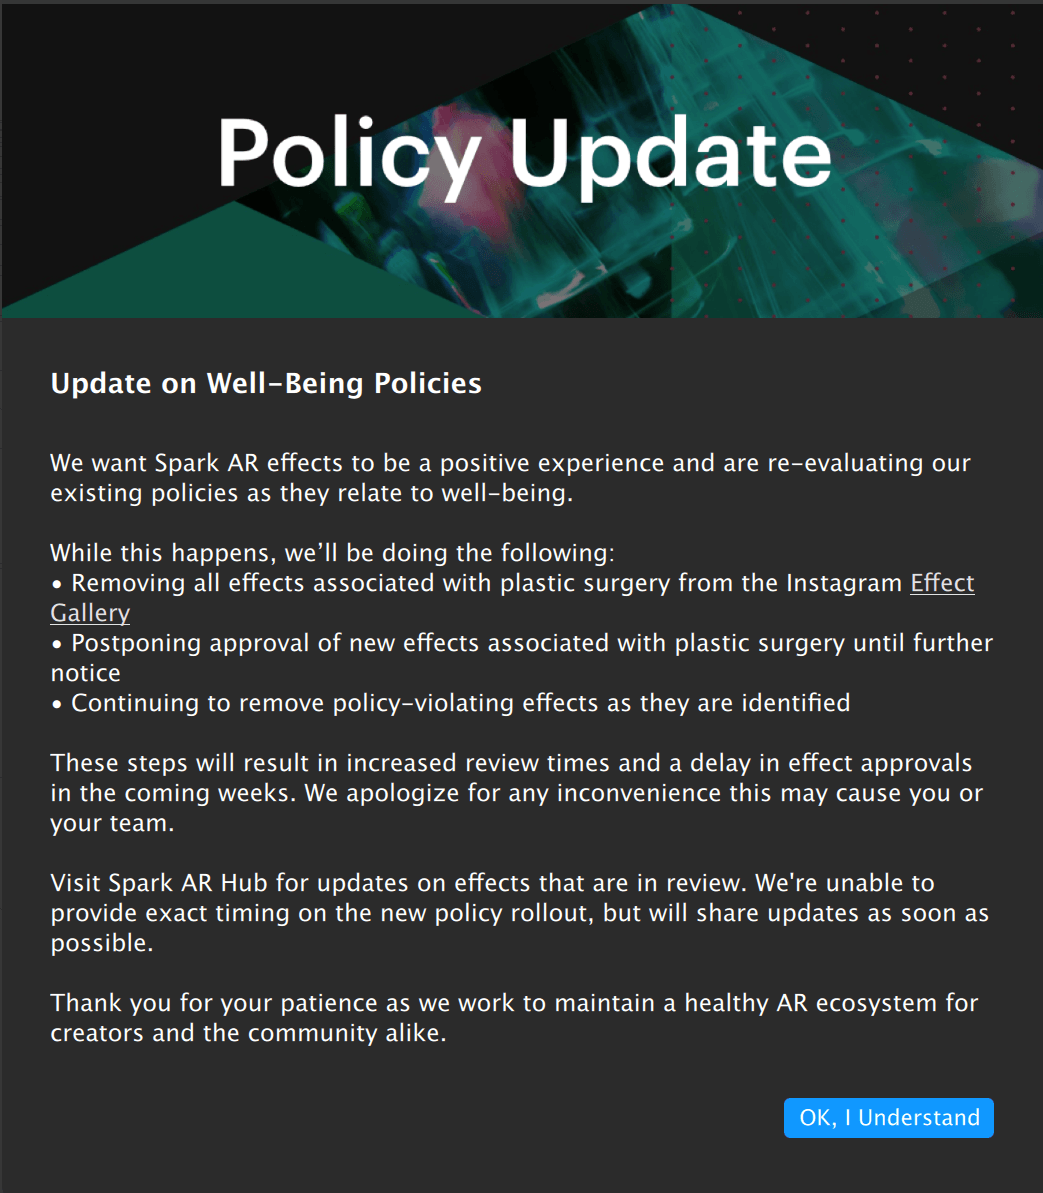 Policy Update Notice by Spark AR Studio